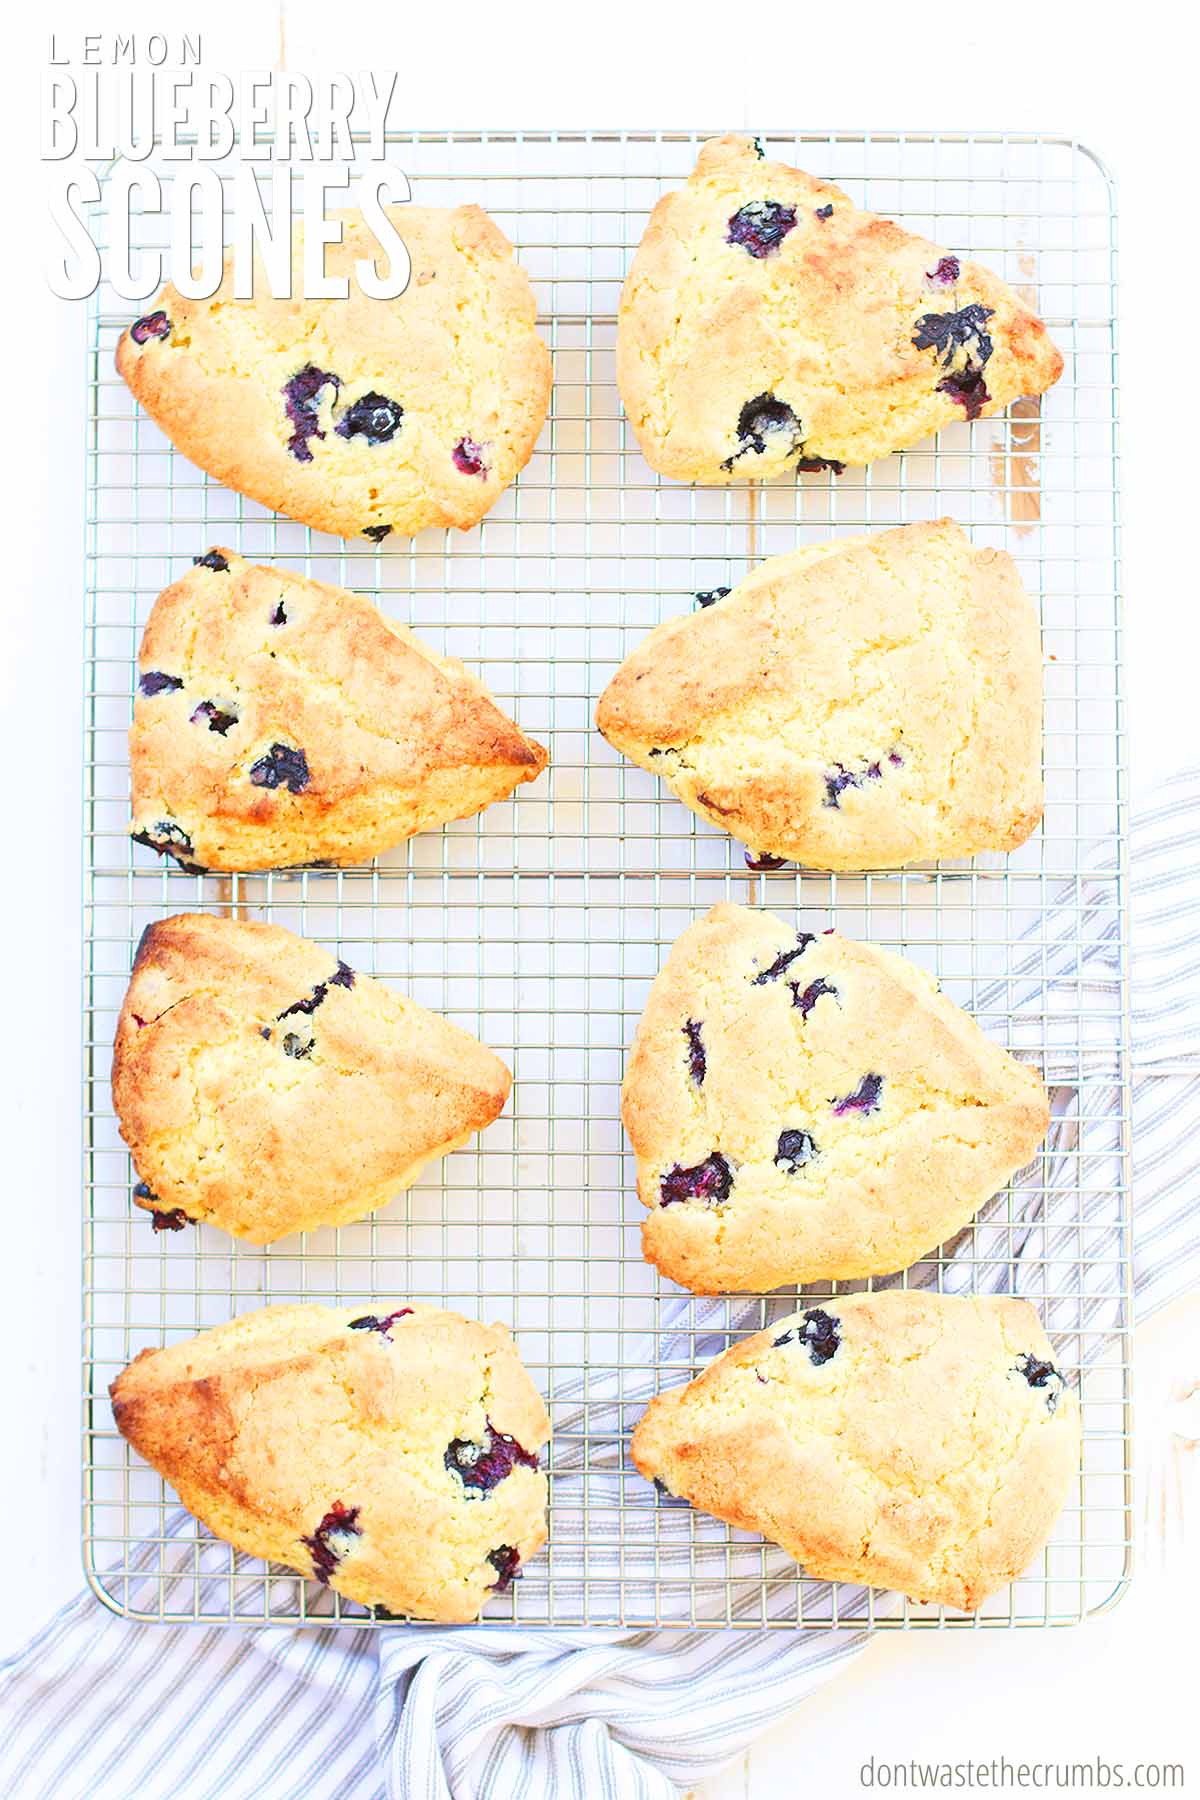 Eight lemon blueberry scones on a cooling rack. Title lemon blueberry scones on the upper left.